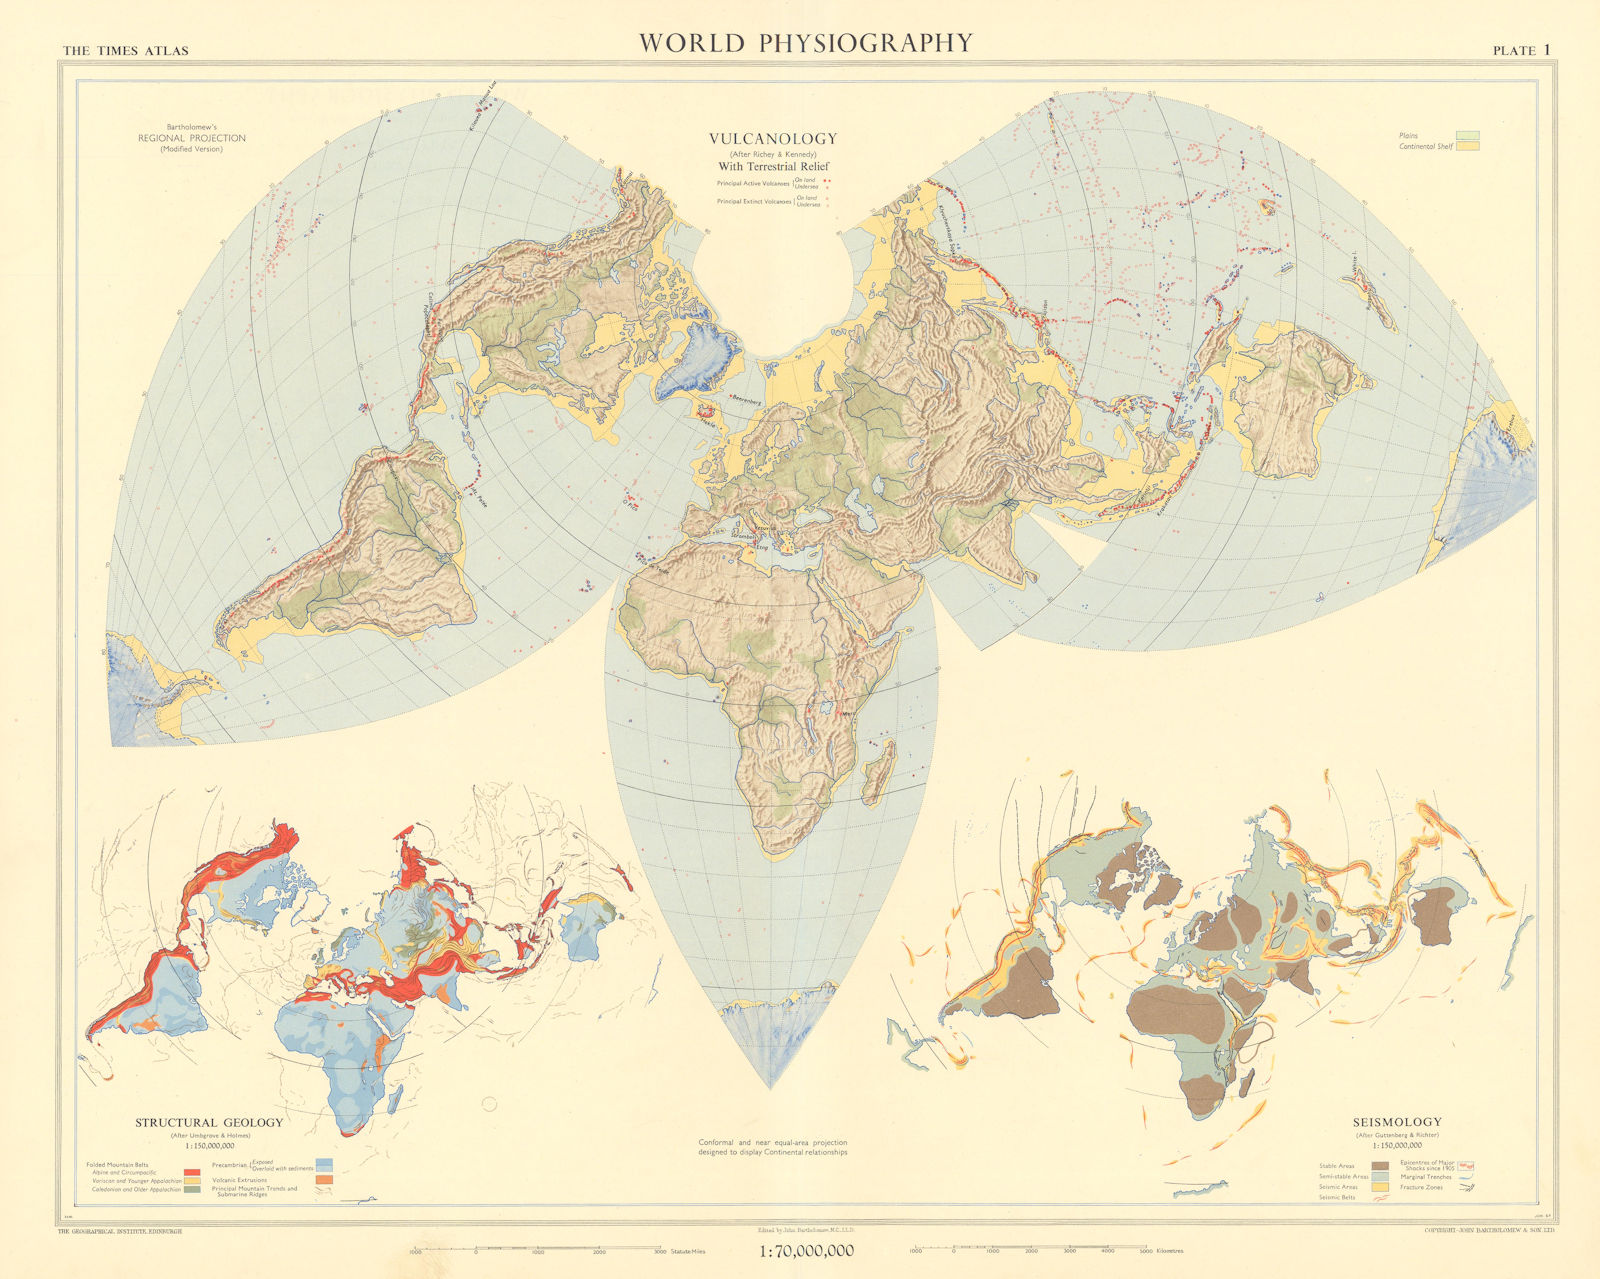 World Physiography. Vulcanology. Structural Geology. Seismology. TIMES 1958 map